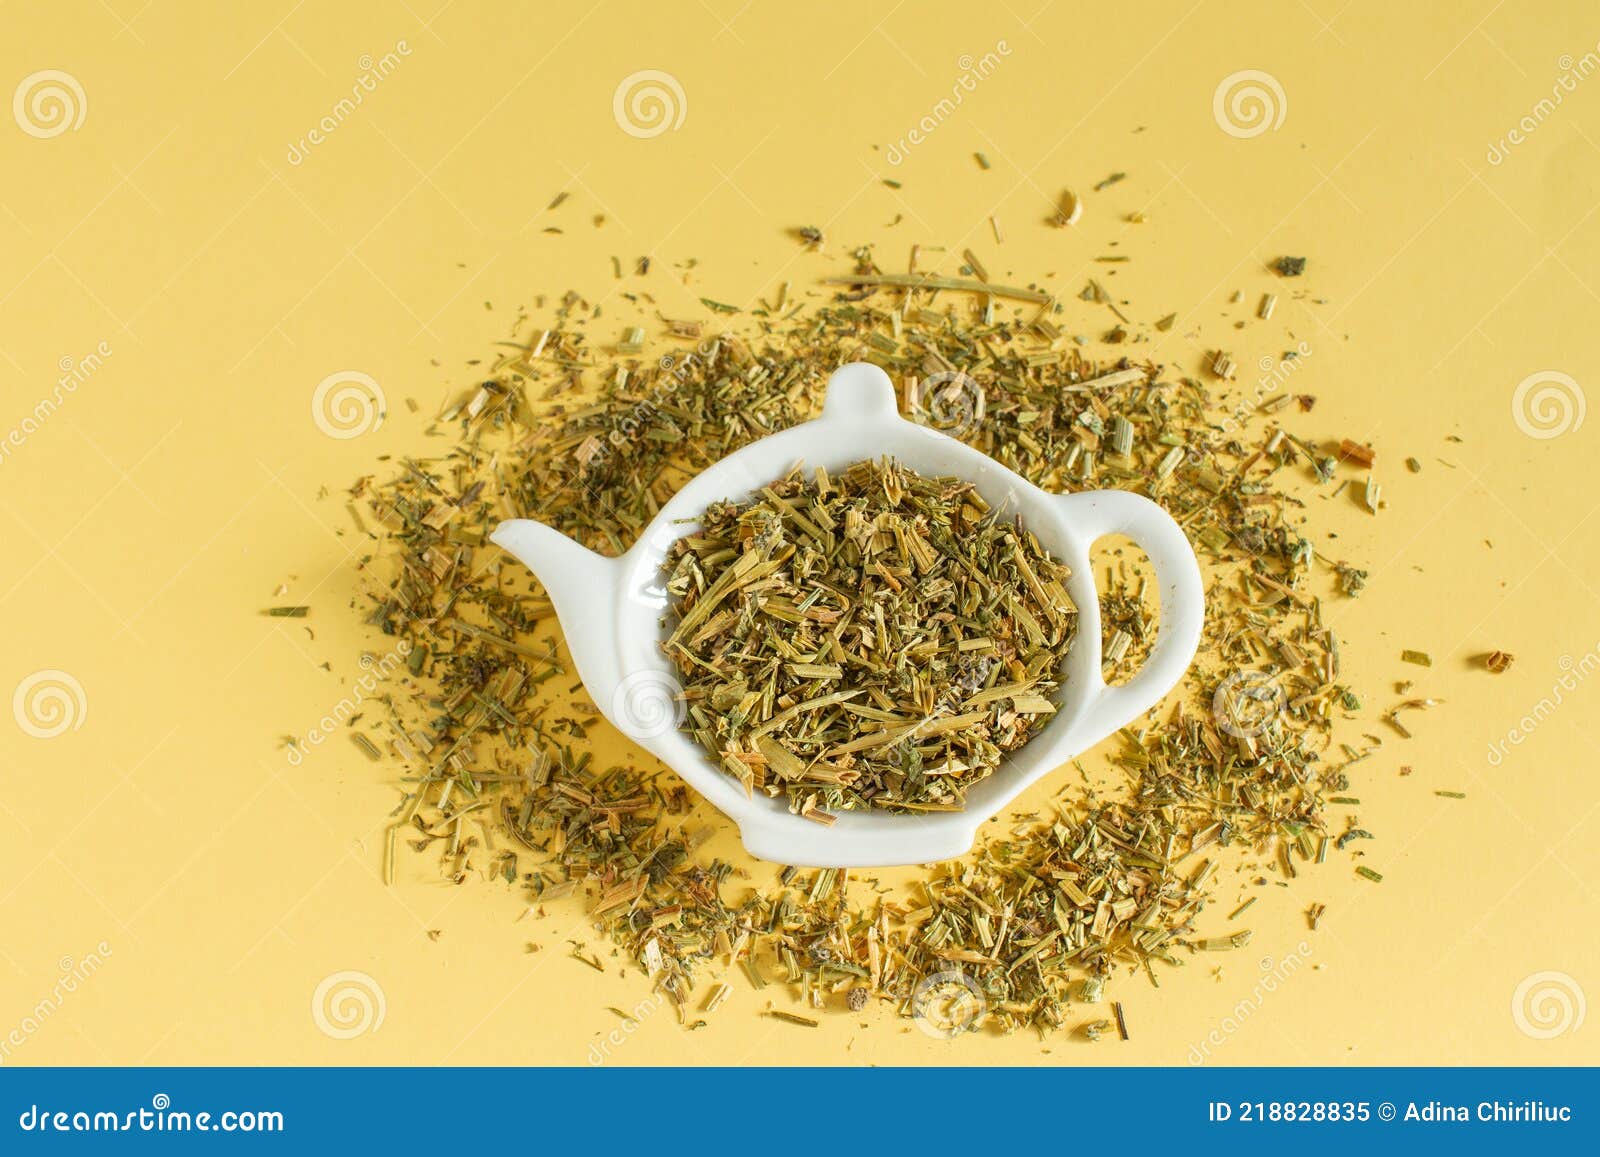 dry tea from medicinal plants   on a teapot-d plate on yellow background